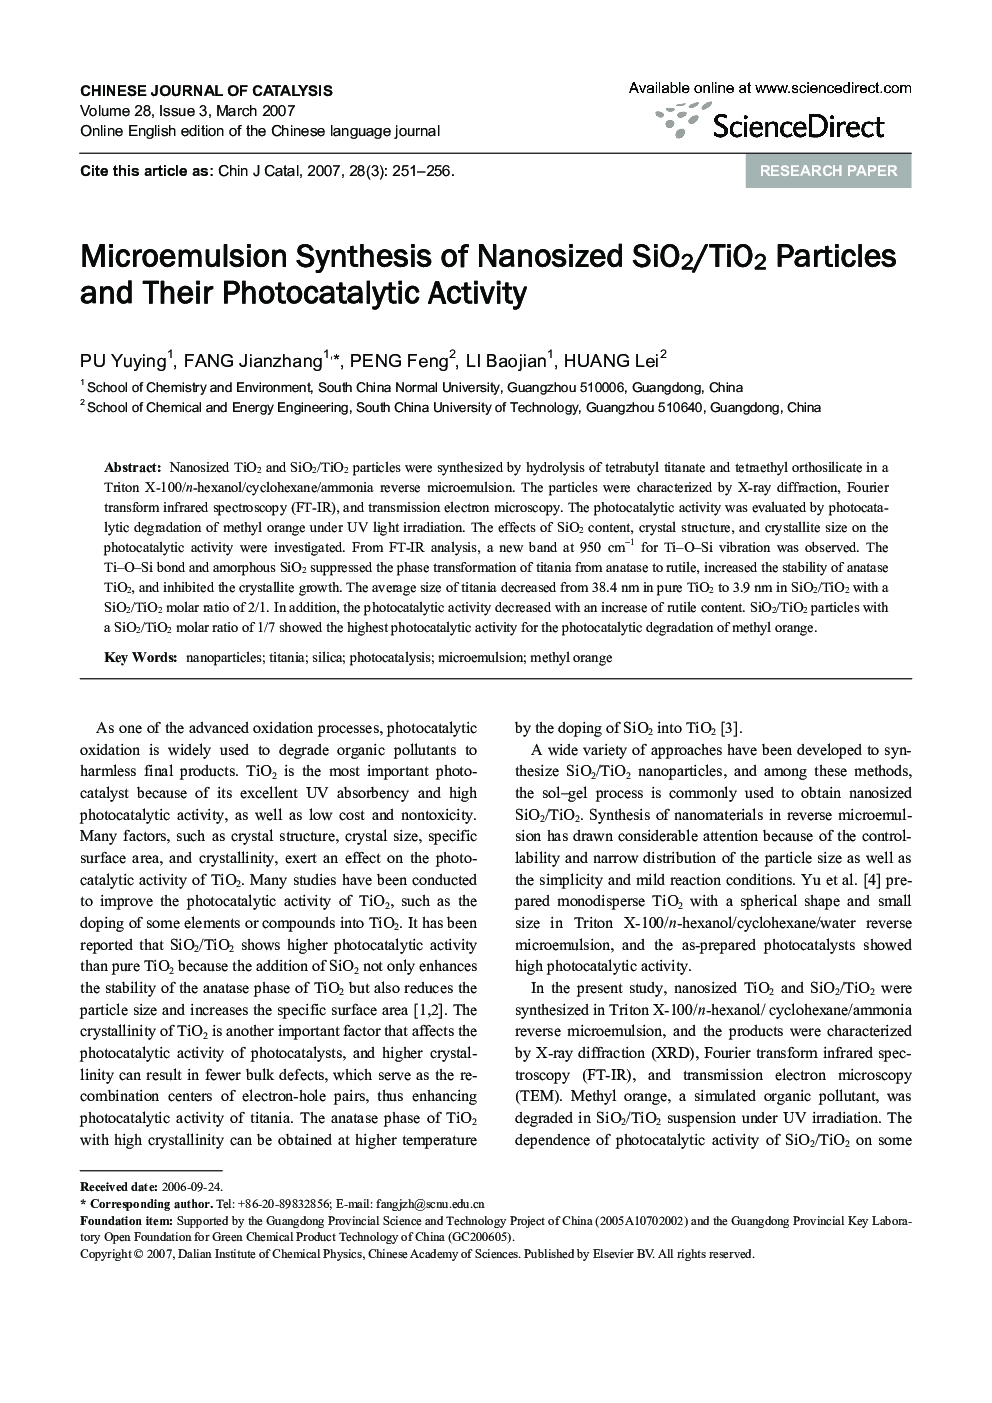 Microemulsion Synthesis of Nanosized SiO2/TiO2 Particles and Their Photocatalytic Activity 